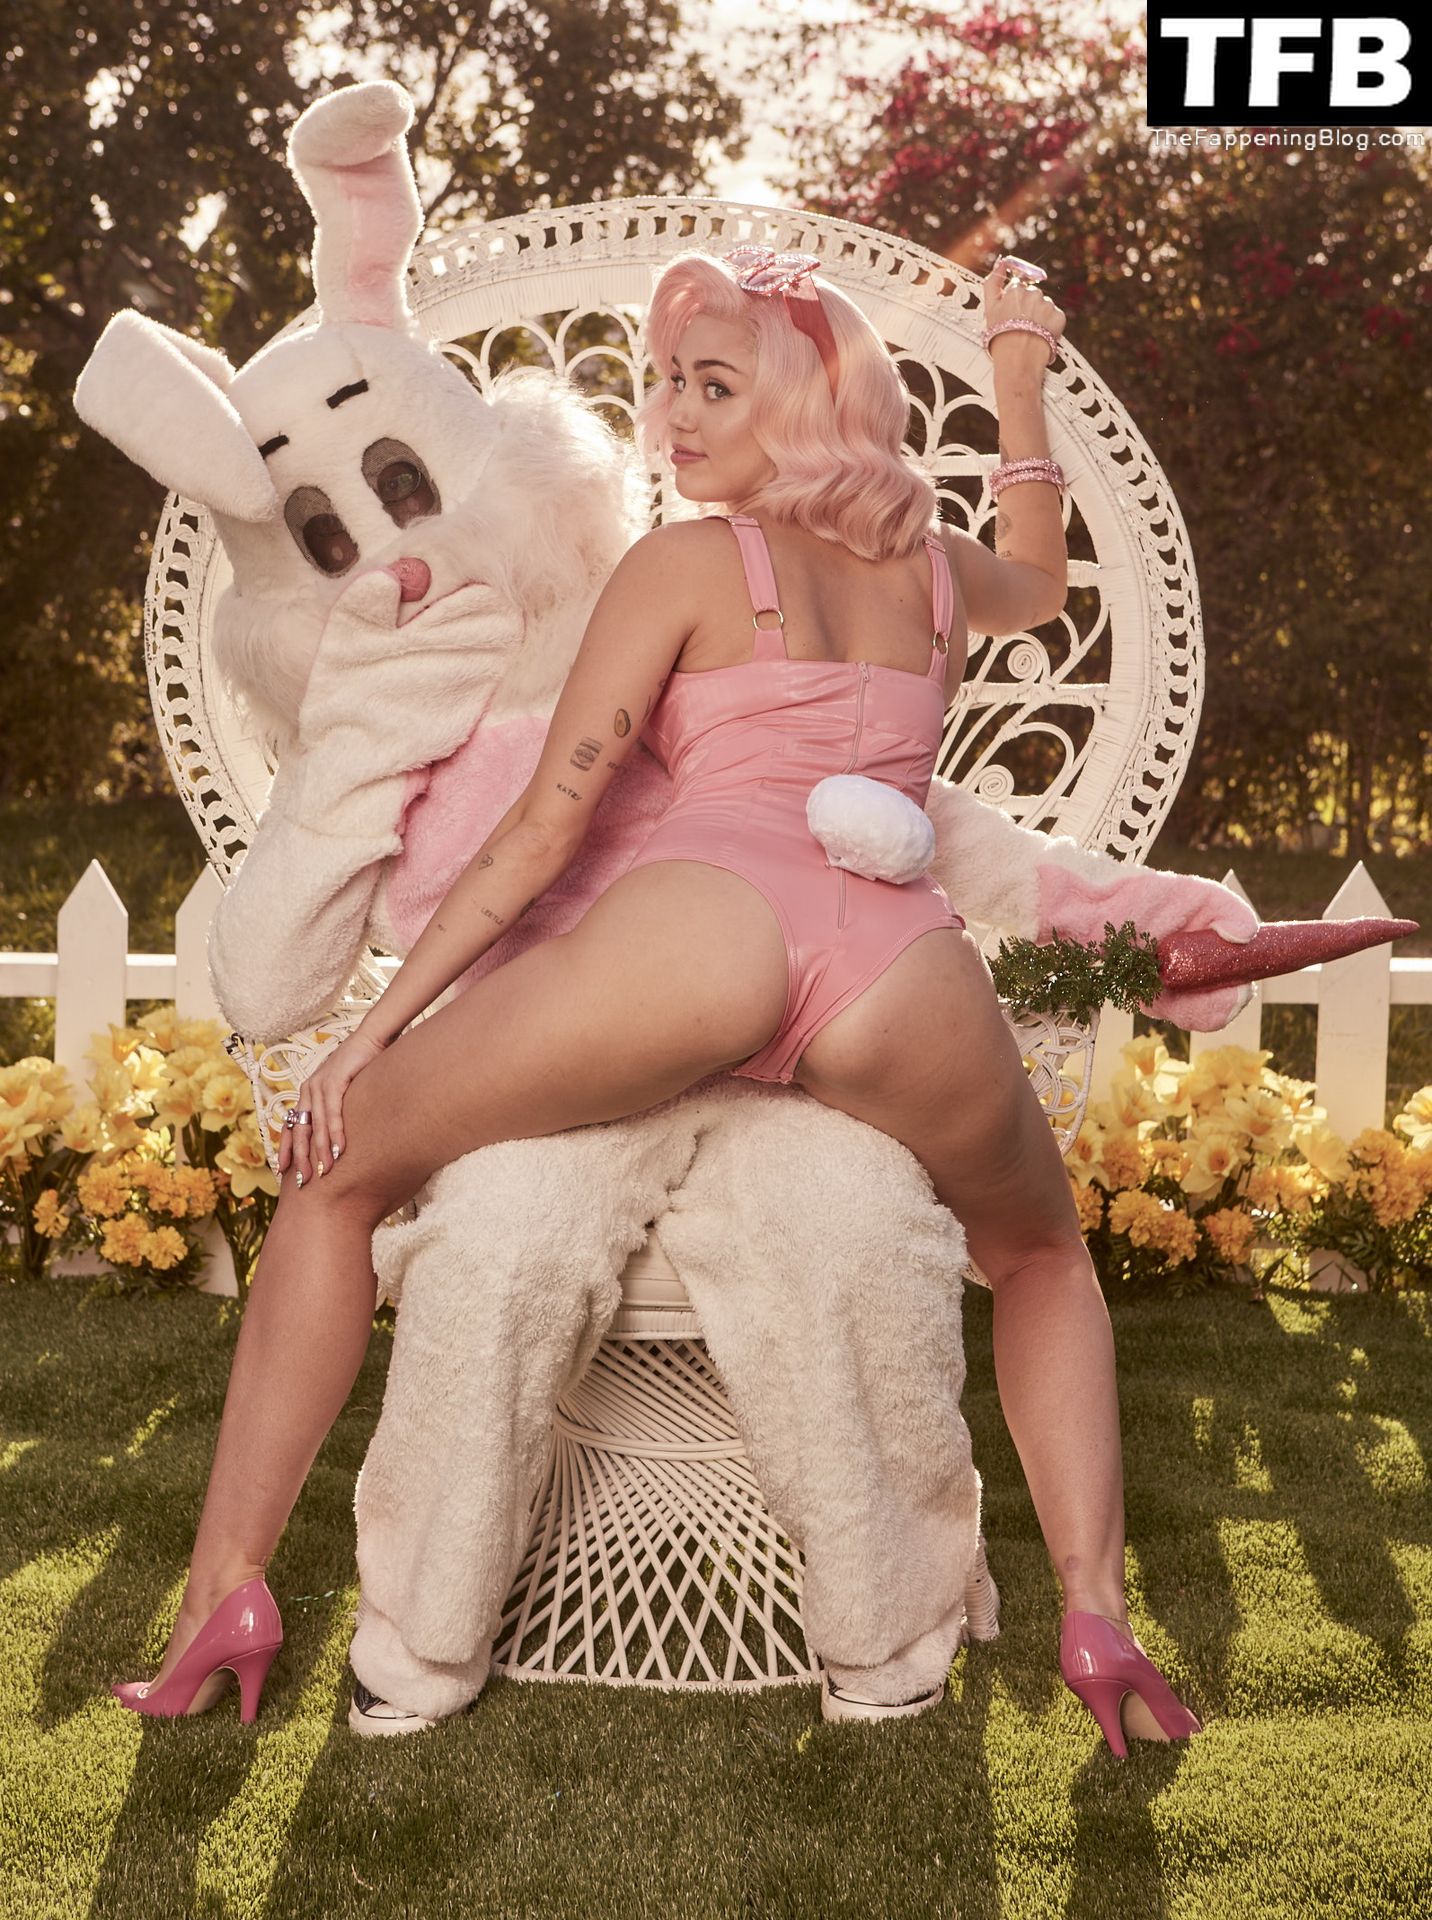 Miley-Cyrus-Nude-Sexy-Vogue-Magazine-Outtakes-The-Fappening-Blog-42.jpg